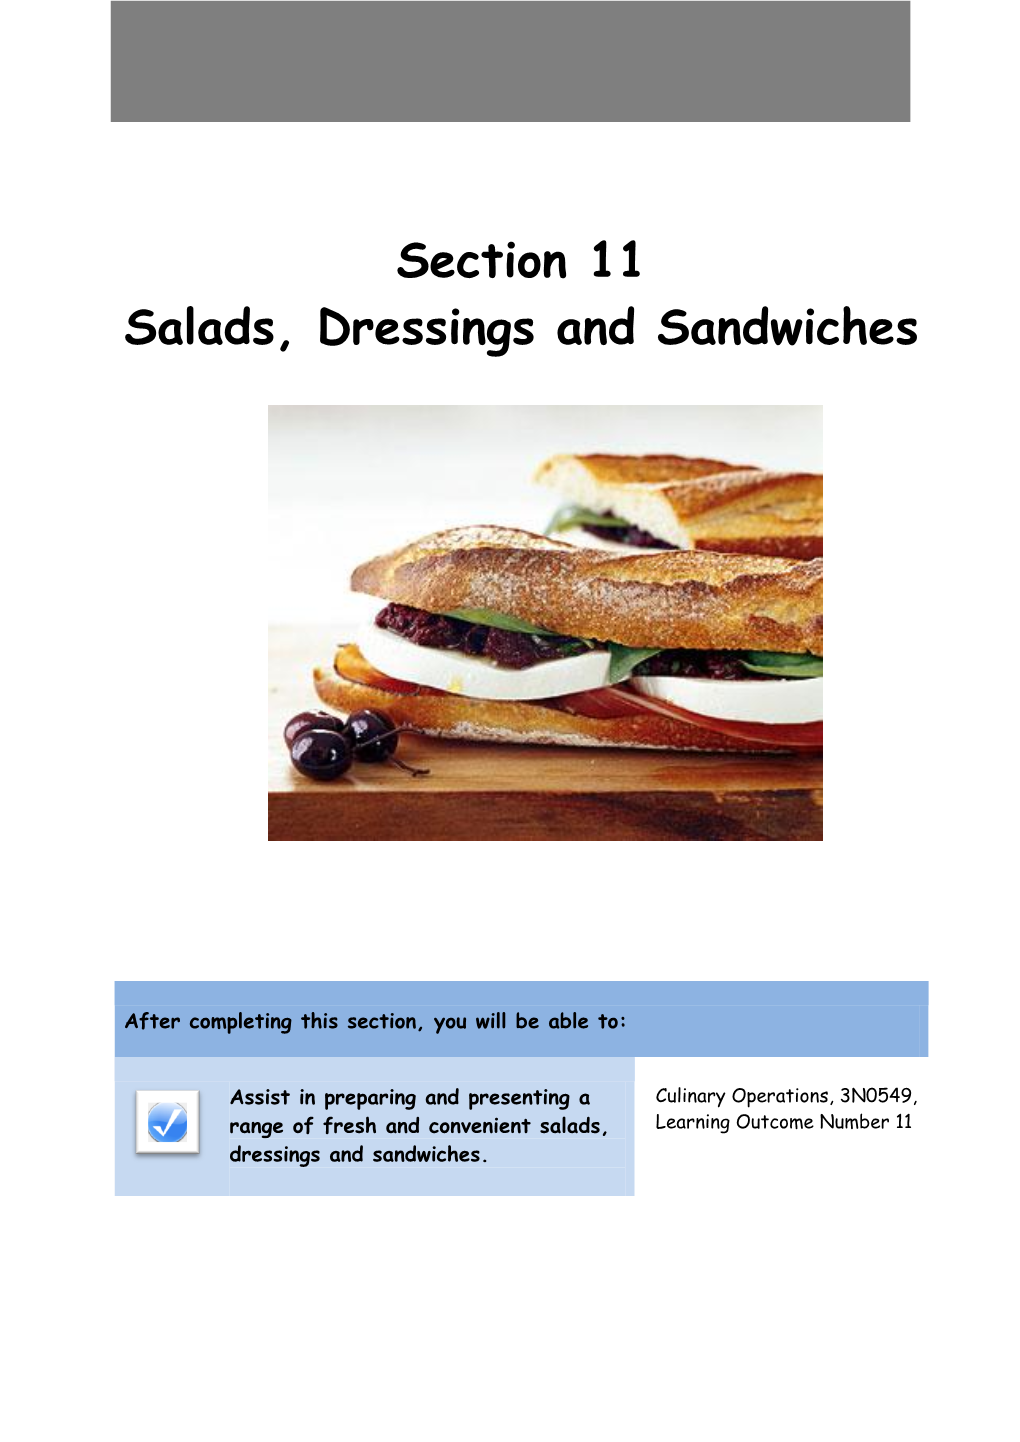 Section 11 Salads, Dressings and Sandwiches